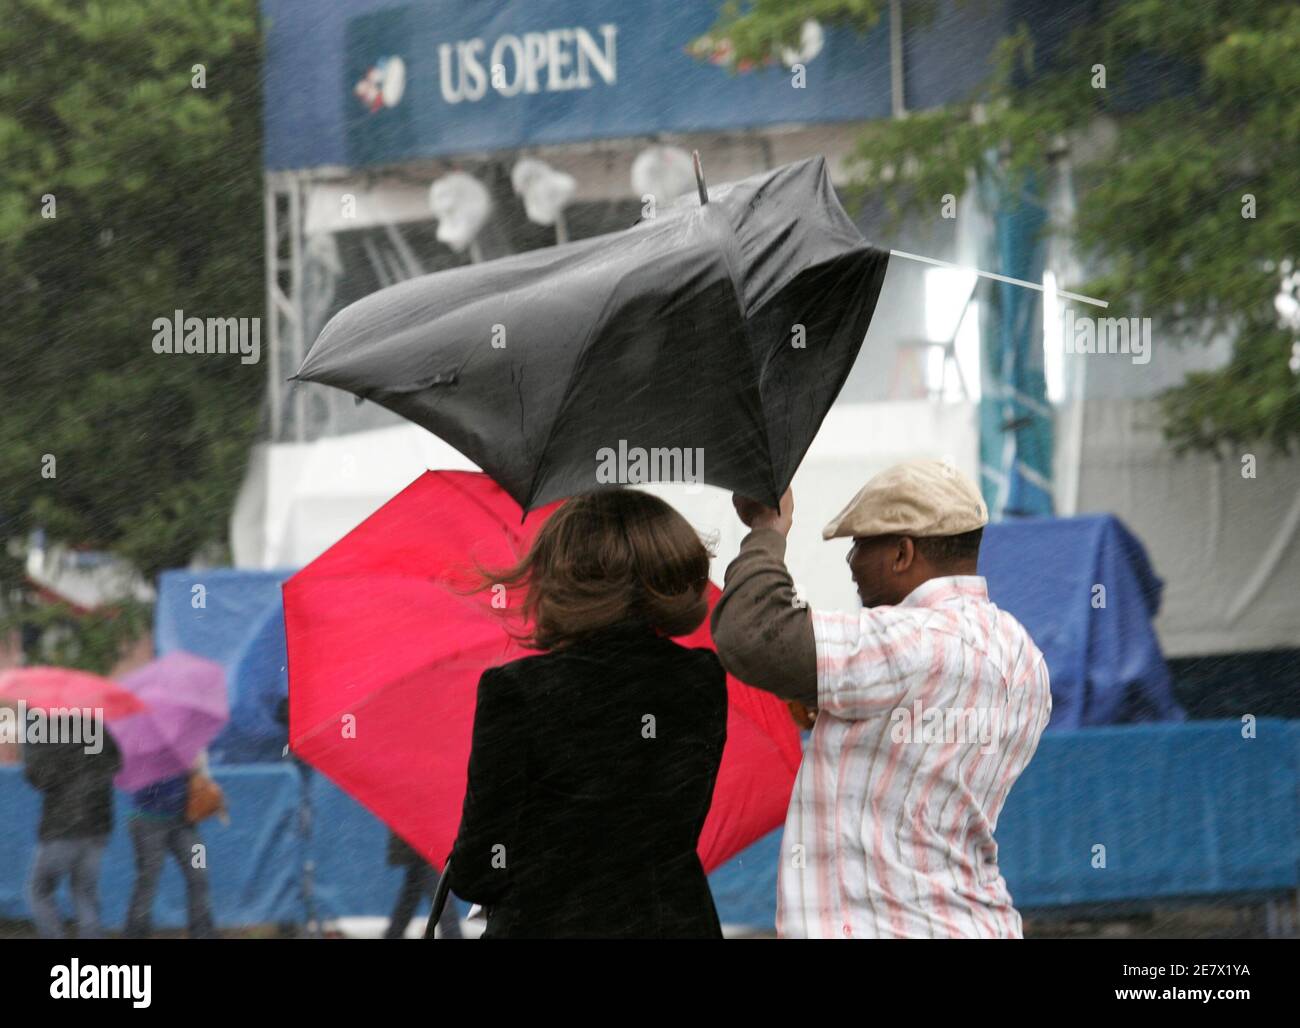 Spectators walk in the wind and rain at the U.S. Open tennis tournament in  New York, September 11, 2009. Tennis play has been suspended at the  tournament because of inclement weather. REUTERS/Eduardo